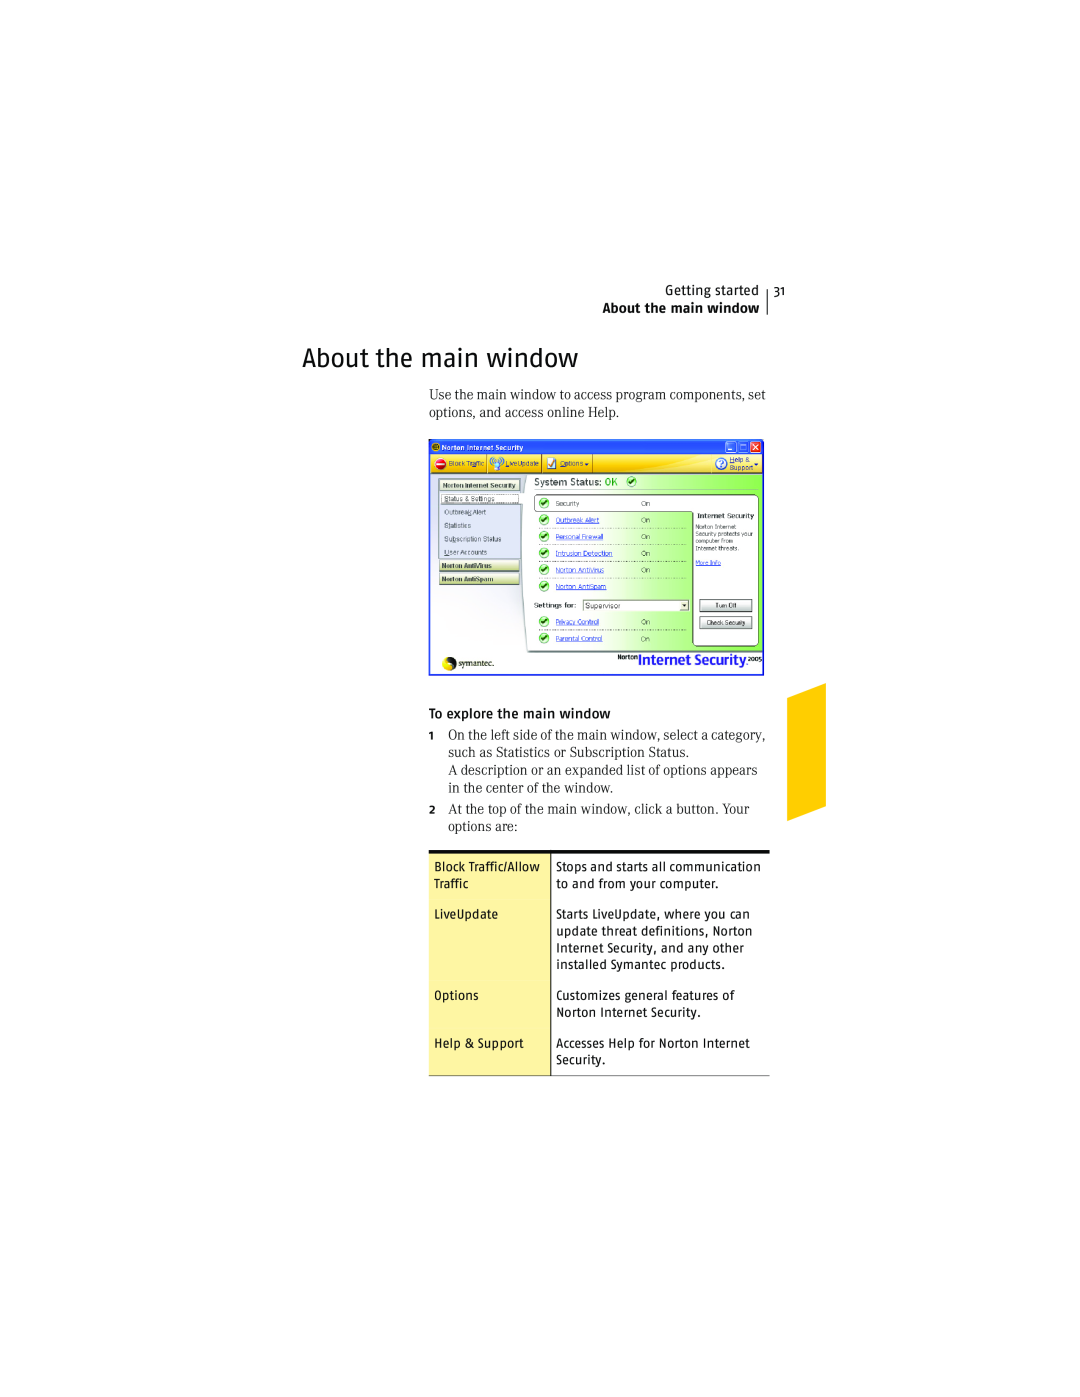 Symantec NIS2005 manual About the main window, Getting started, To explore the main window 